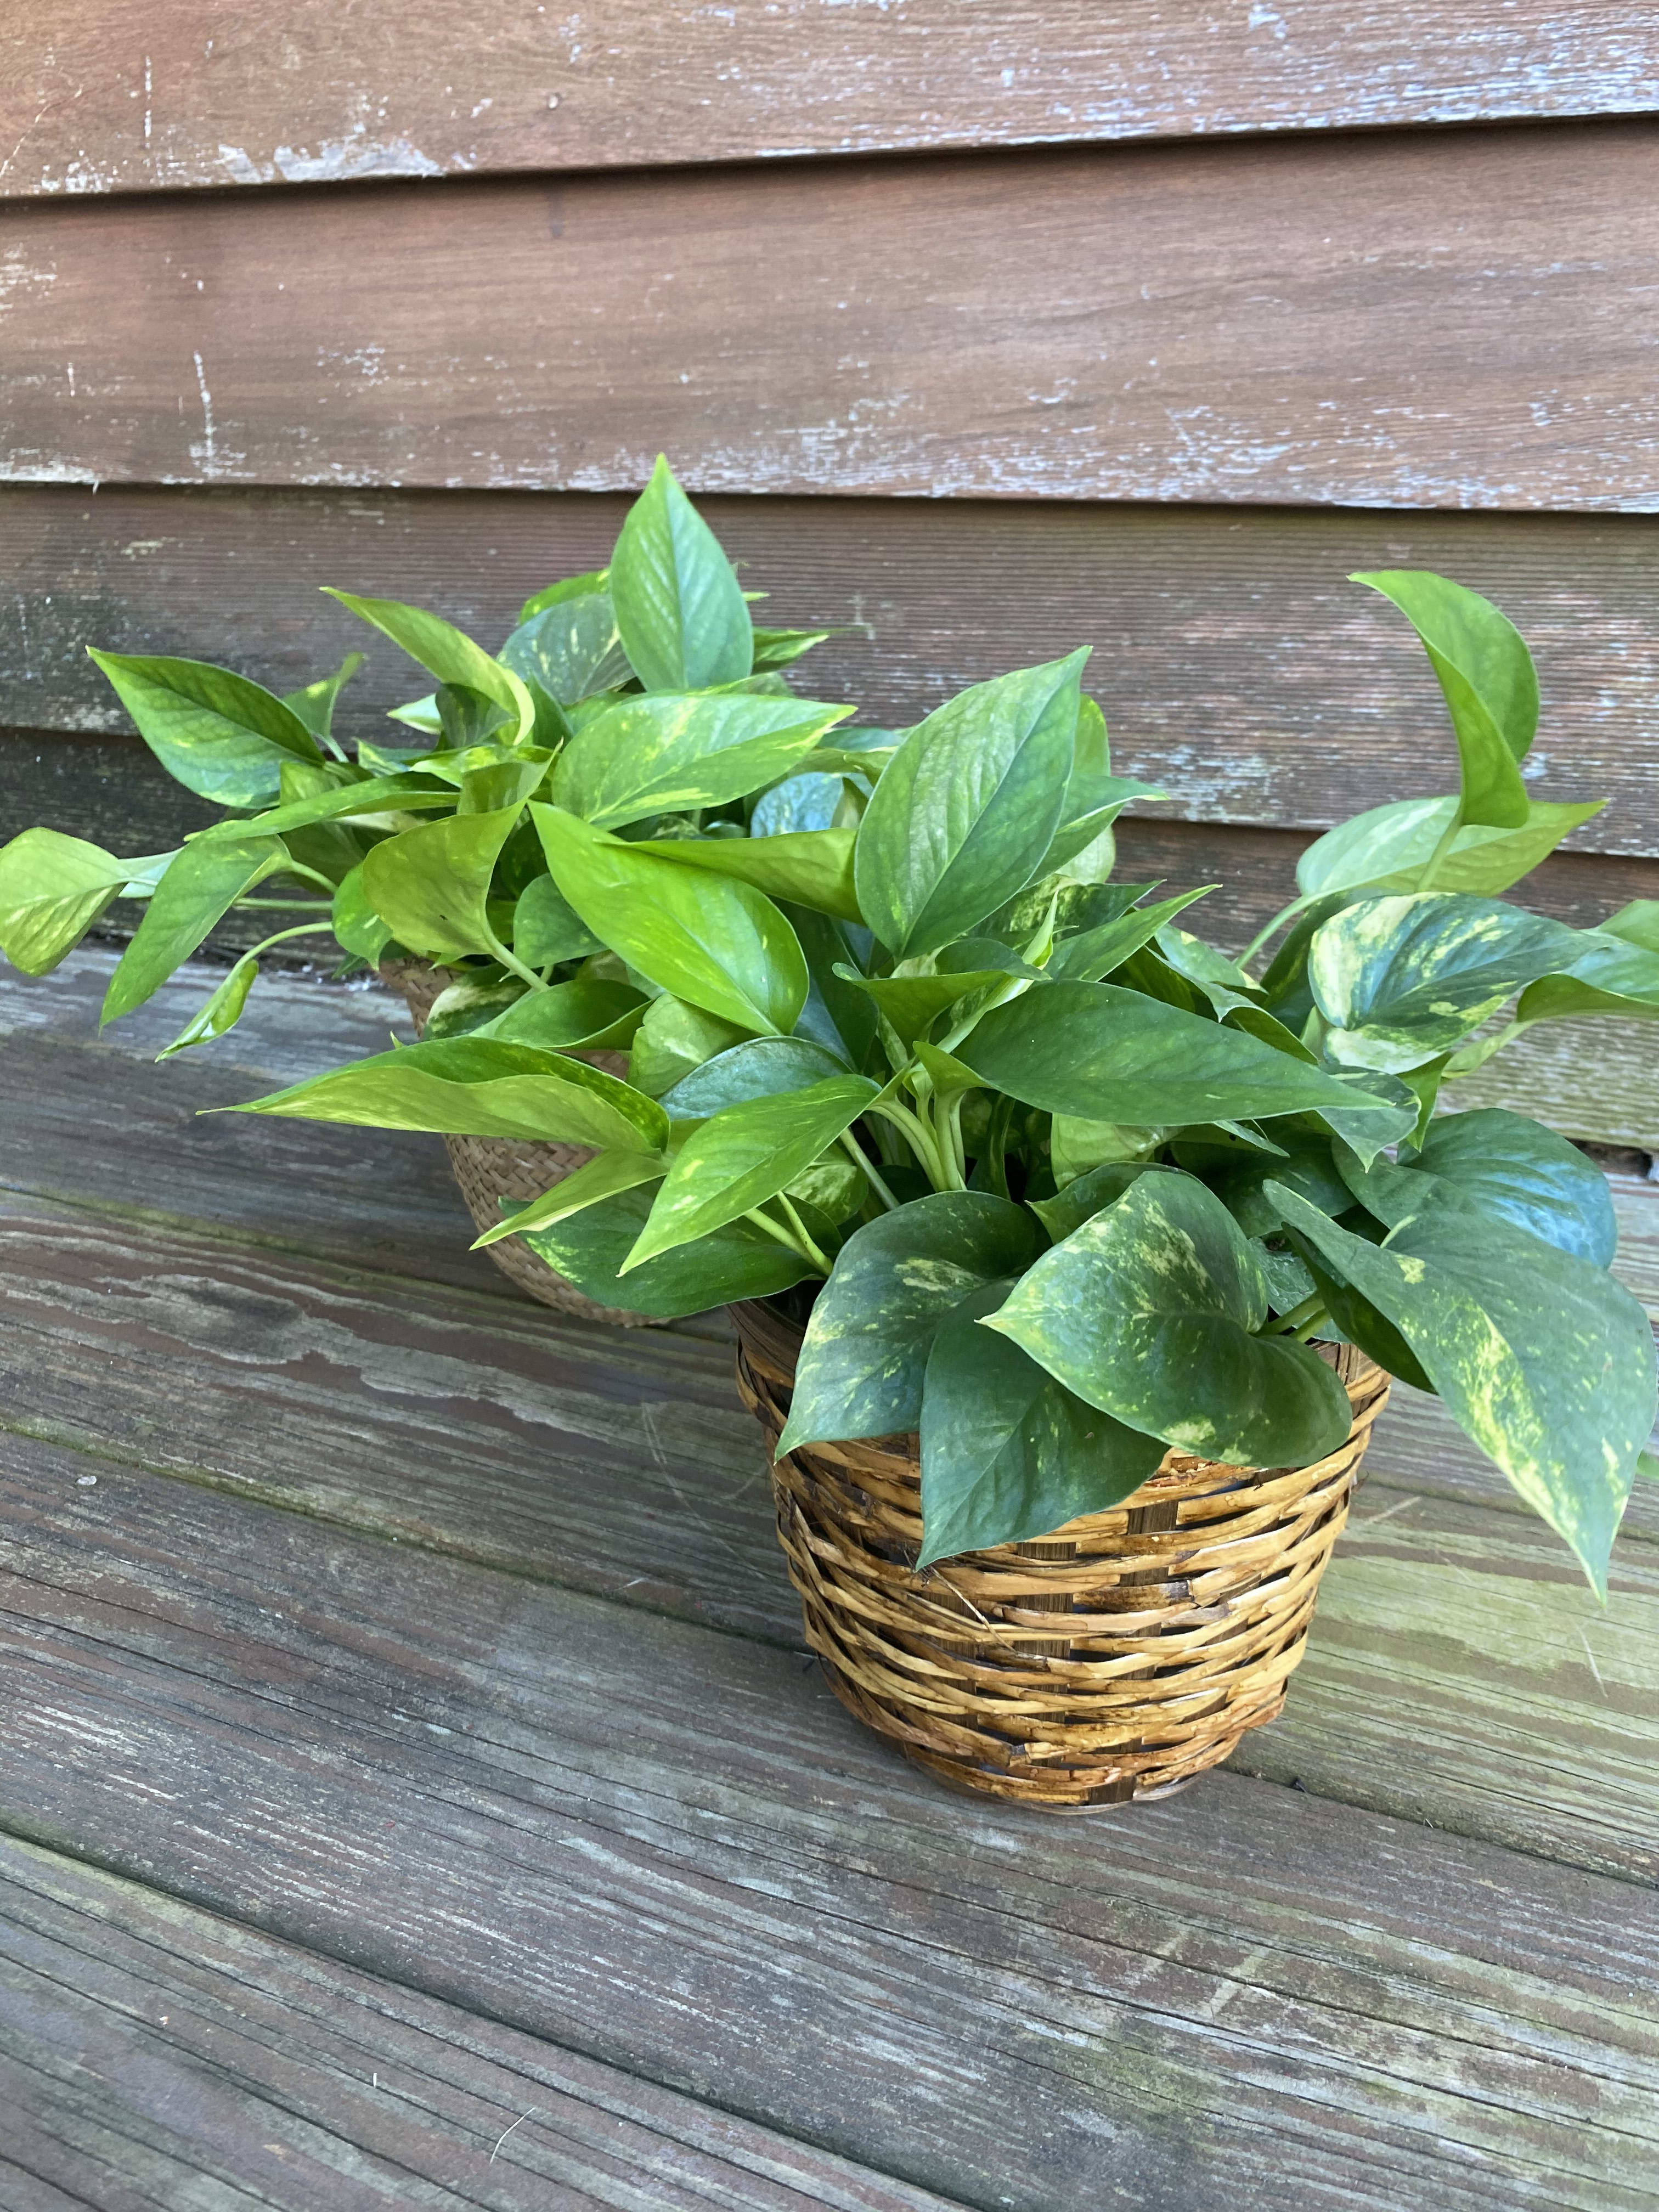 6&quot; Golden Pothos with Basket - 1 available - Another one of our &quot;hard to kill&quot; houseplant offerings! The pothos is a classic beginner  houseplant for people with thumbs of any color, great for any occasion. Everyone should have one! Mildly toxic to pets. To find out what other houseplants we have in our inventory, give us a call - 610-458-3475